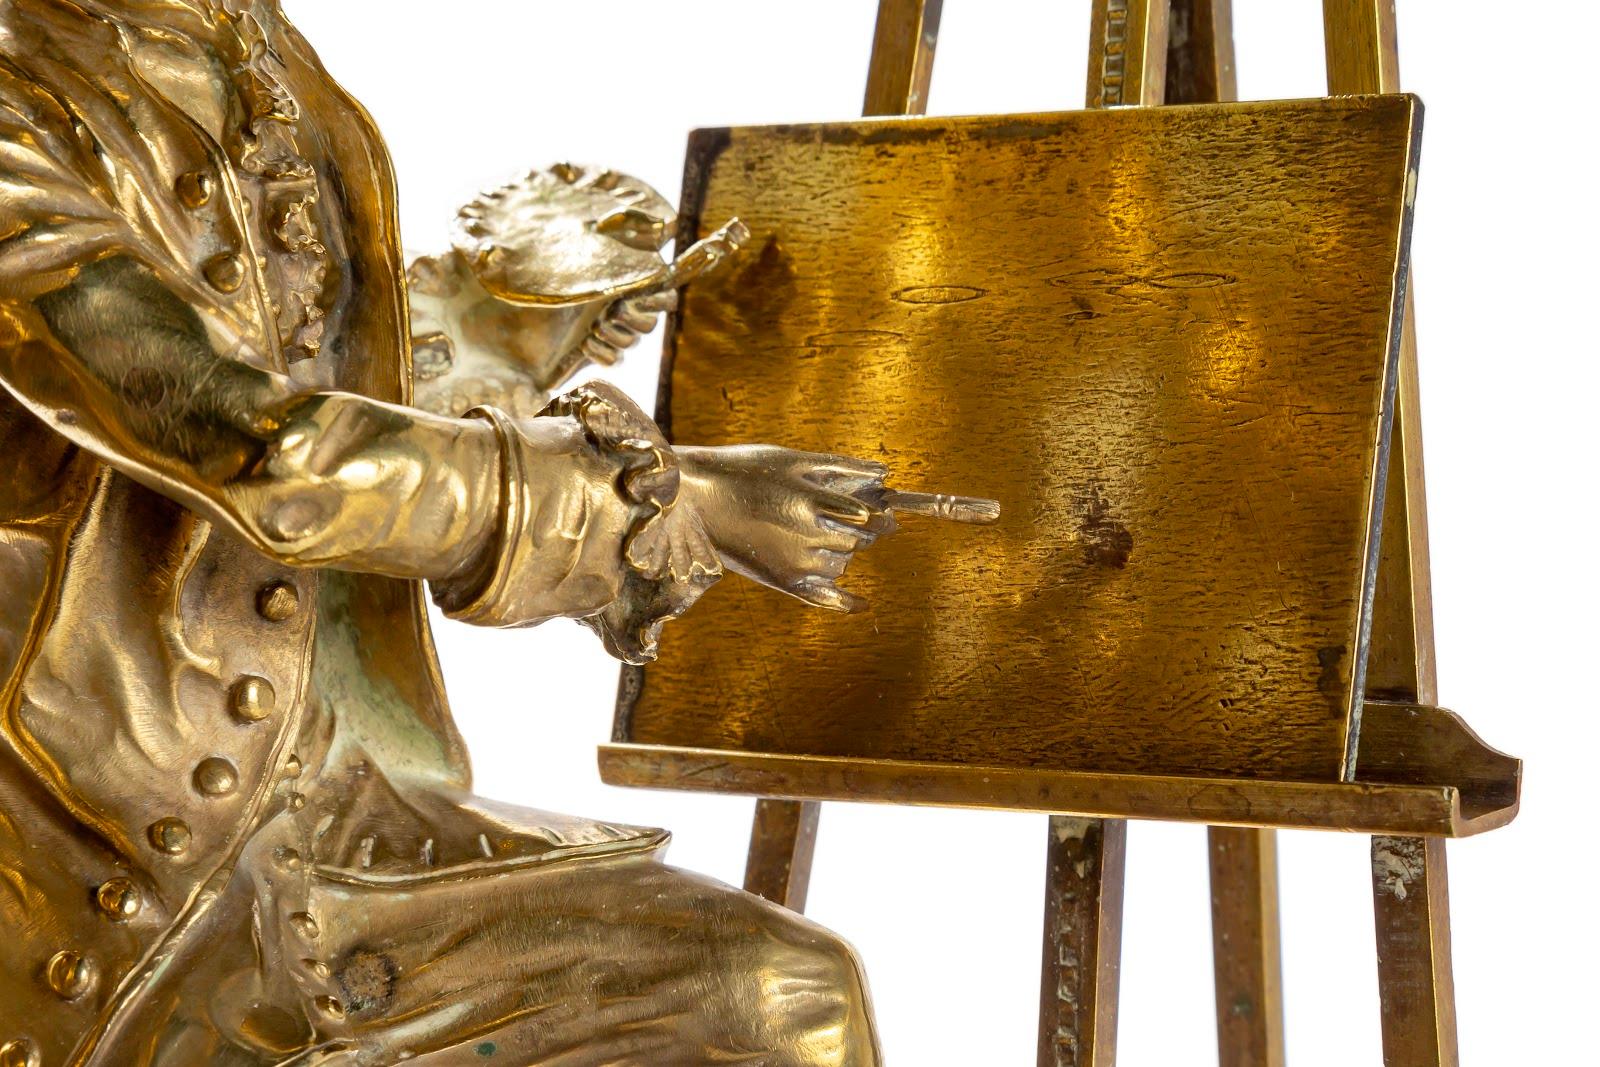 Man & Woman By Easel - Gold Figurative Sculpture by Unknown